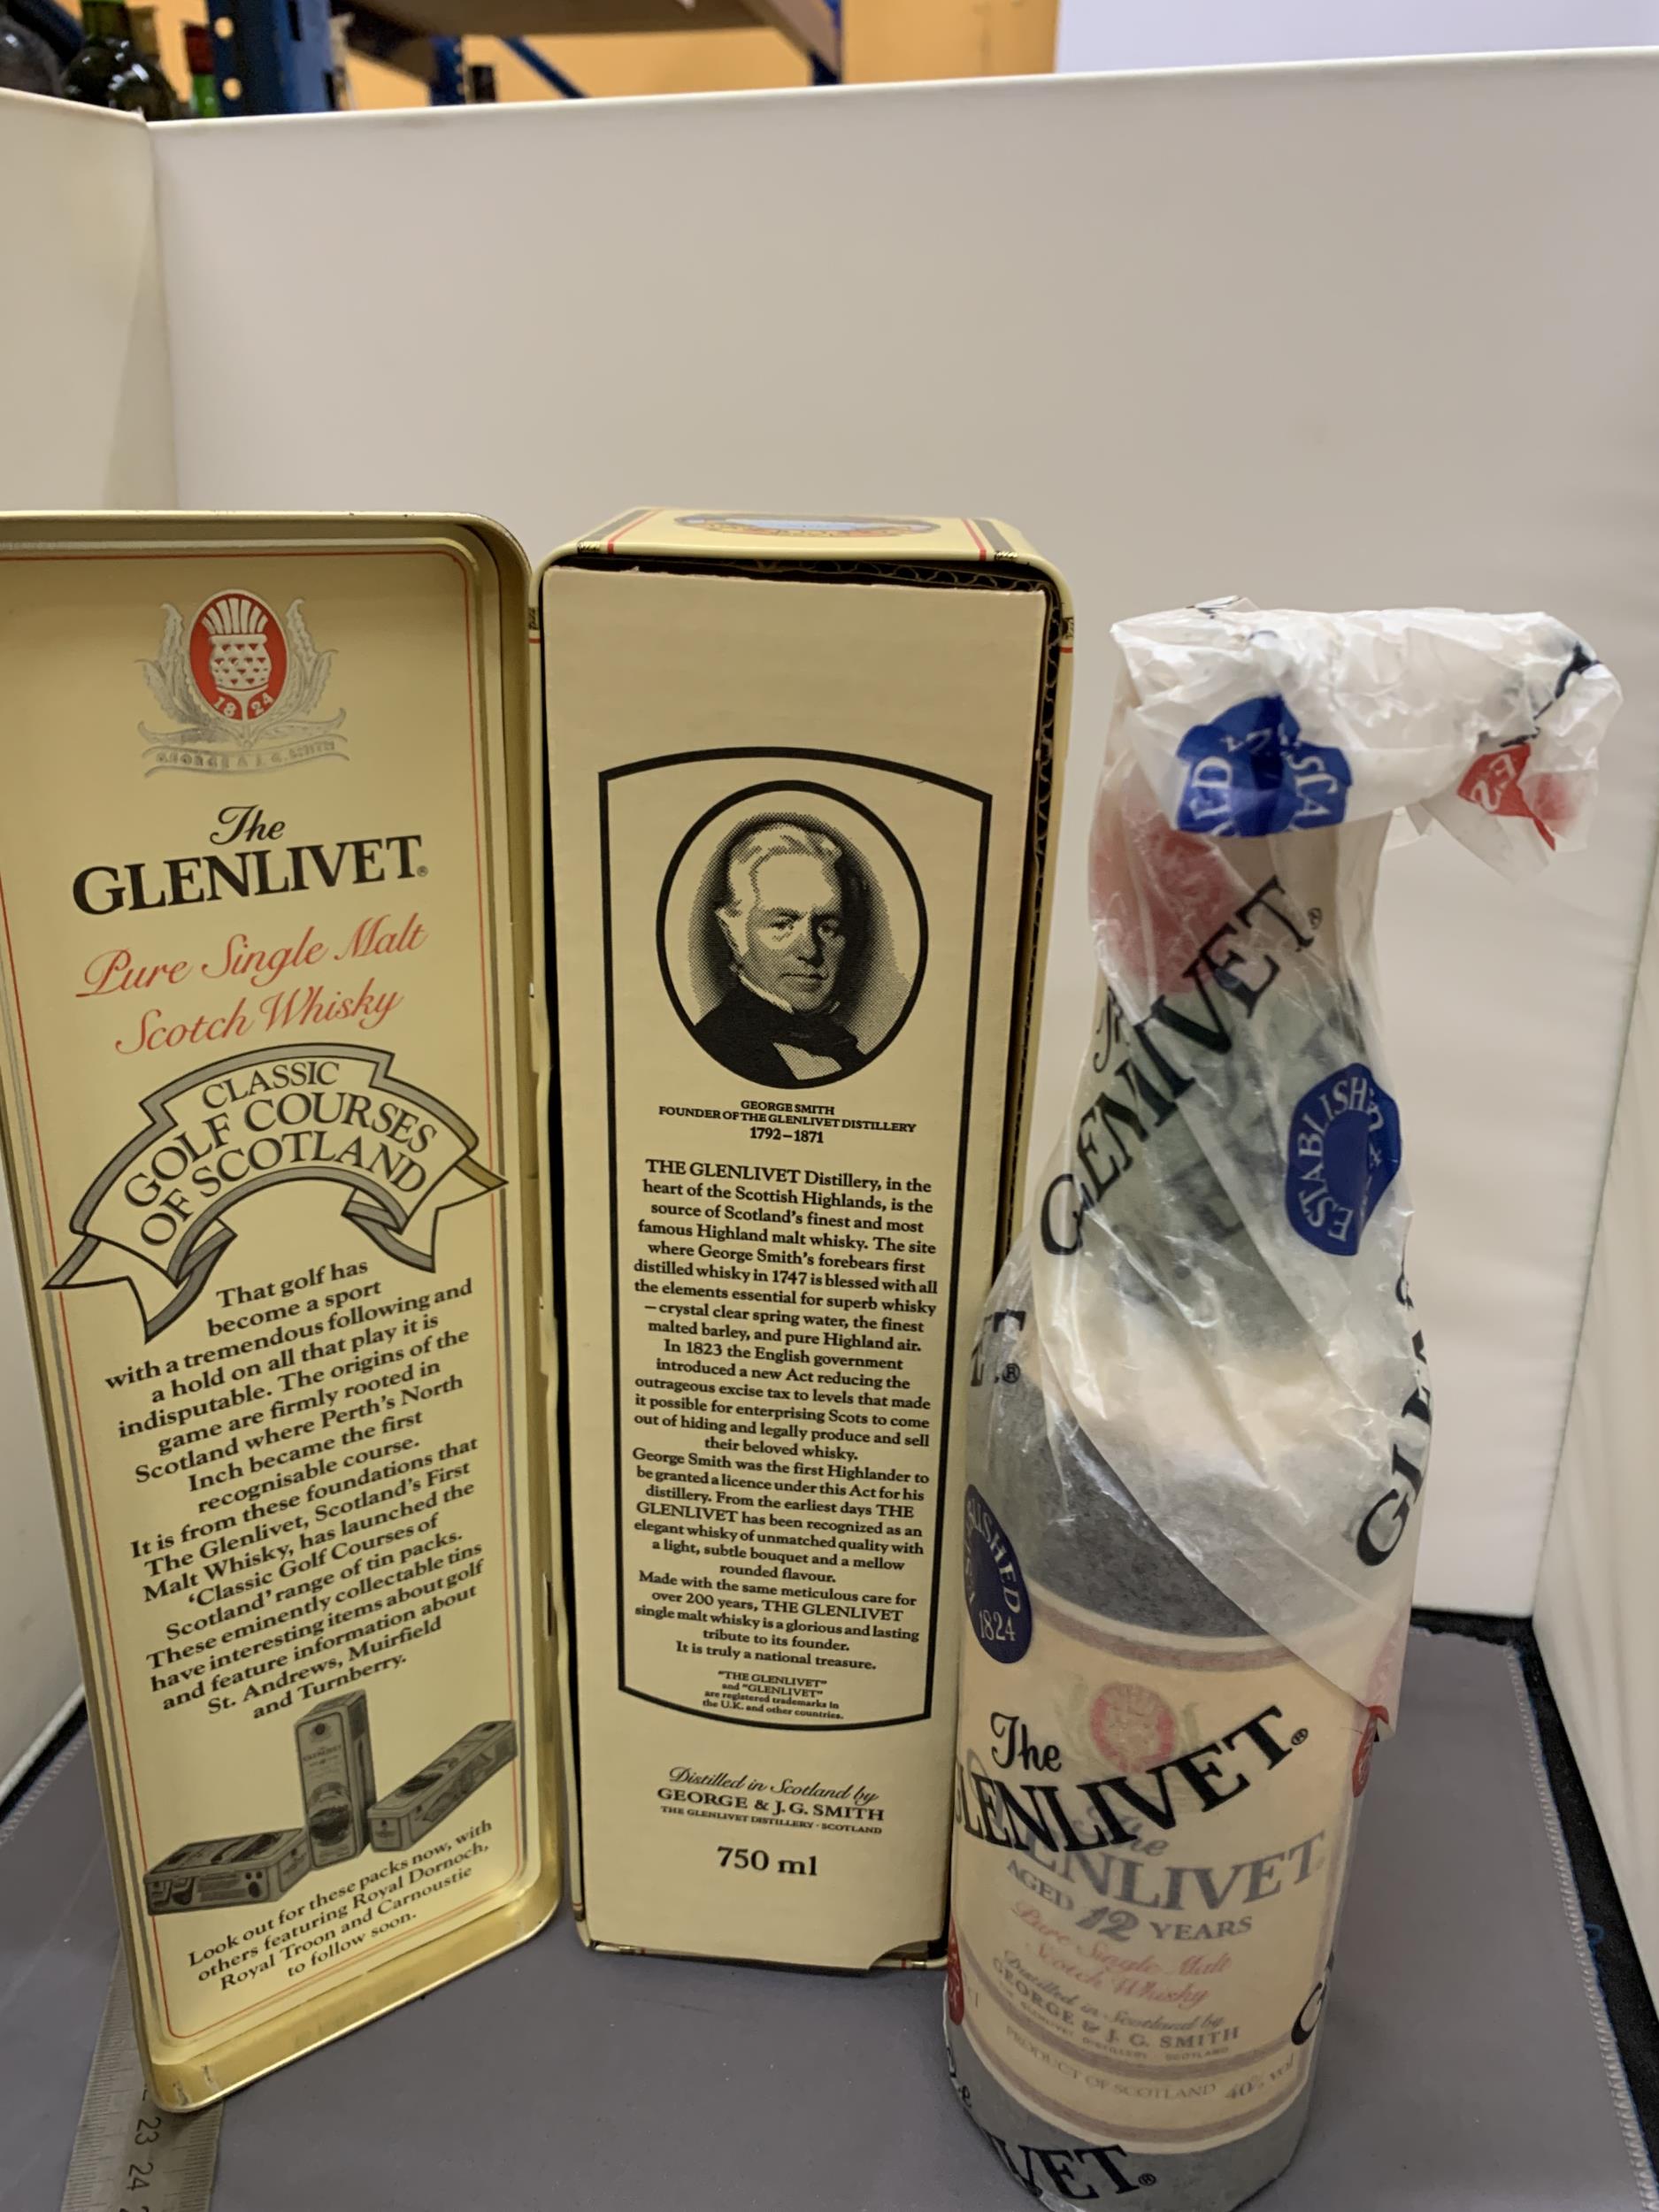 THE GLENLIVET AGED 12 YEARS CLASSIC GOLF COURSES OF SCOTLAND TUNBERRY, 750ML IN ORIGINAL WRAPPING - Image 3 of 5